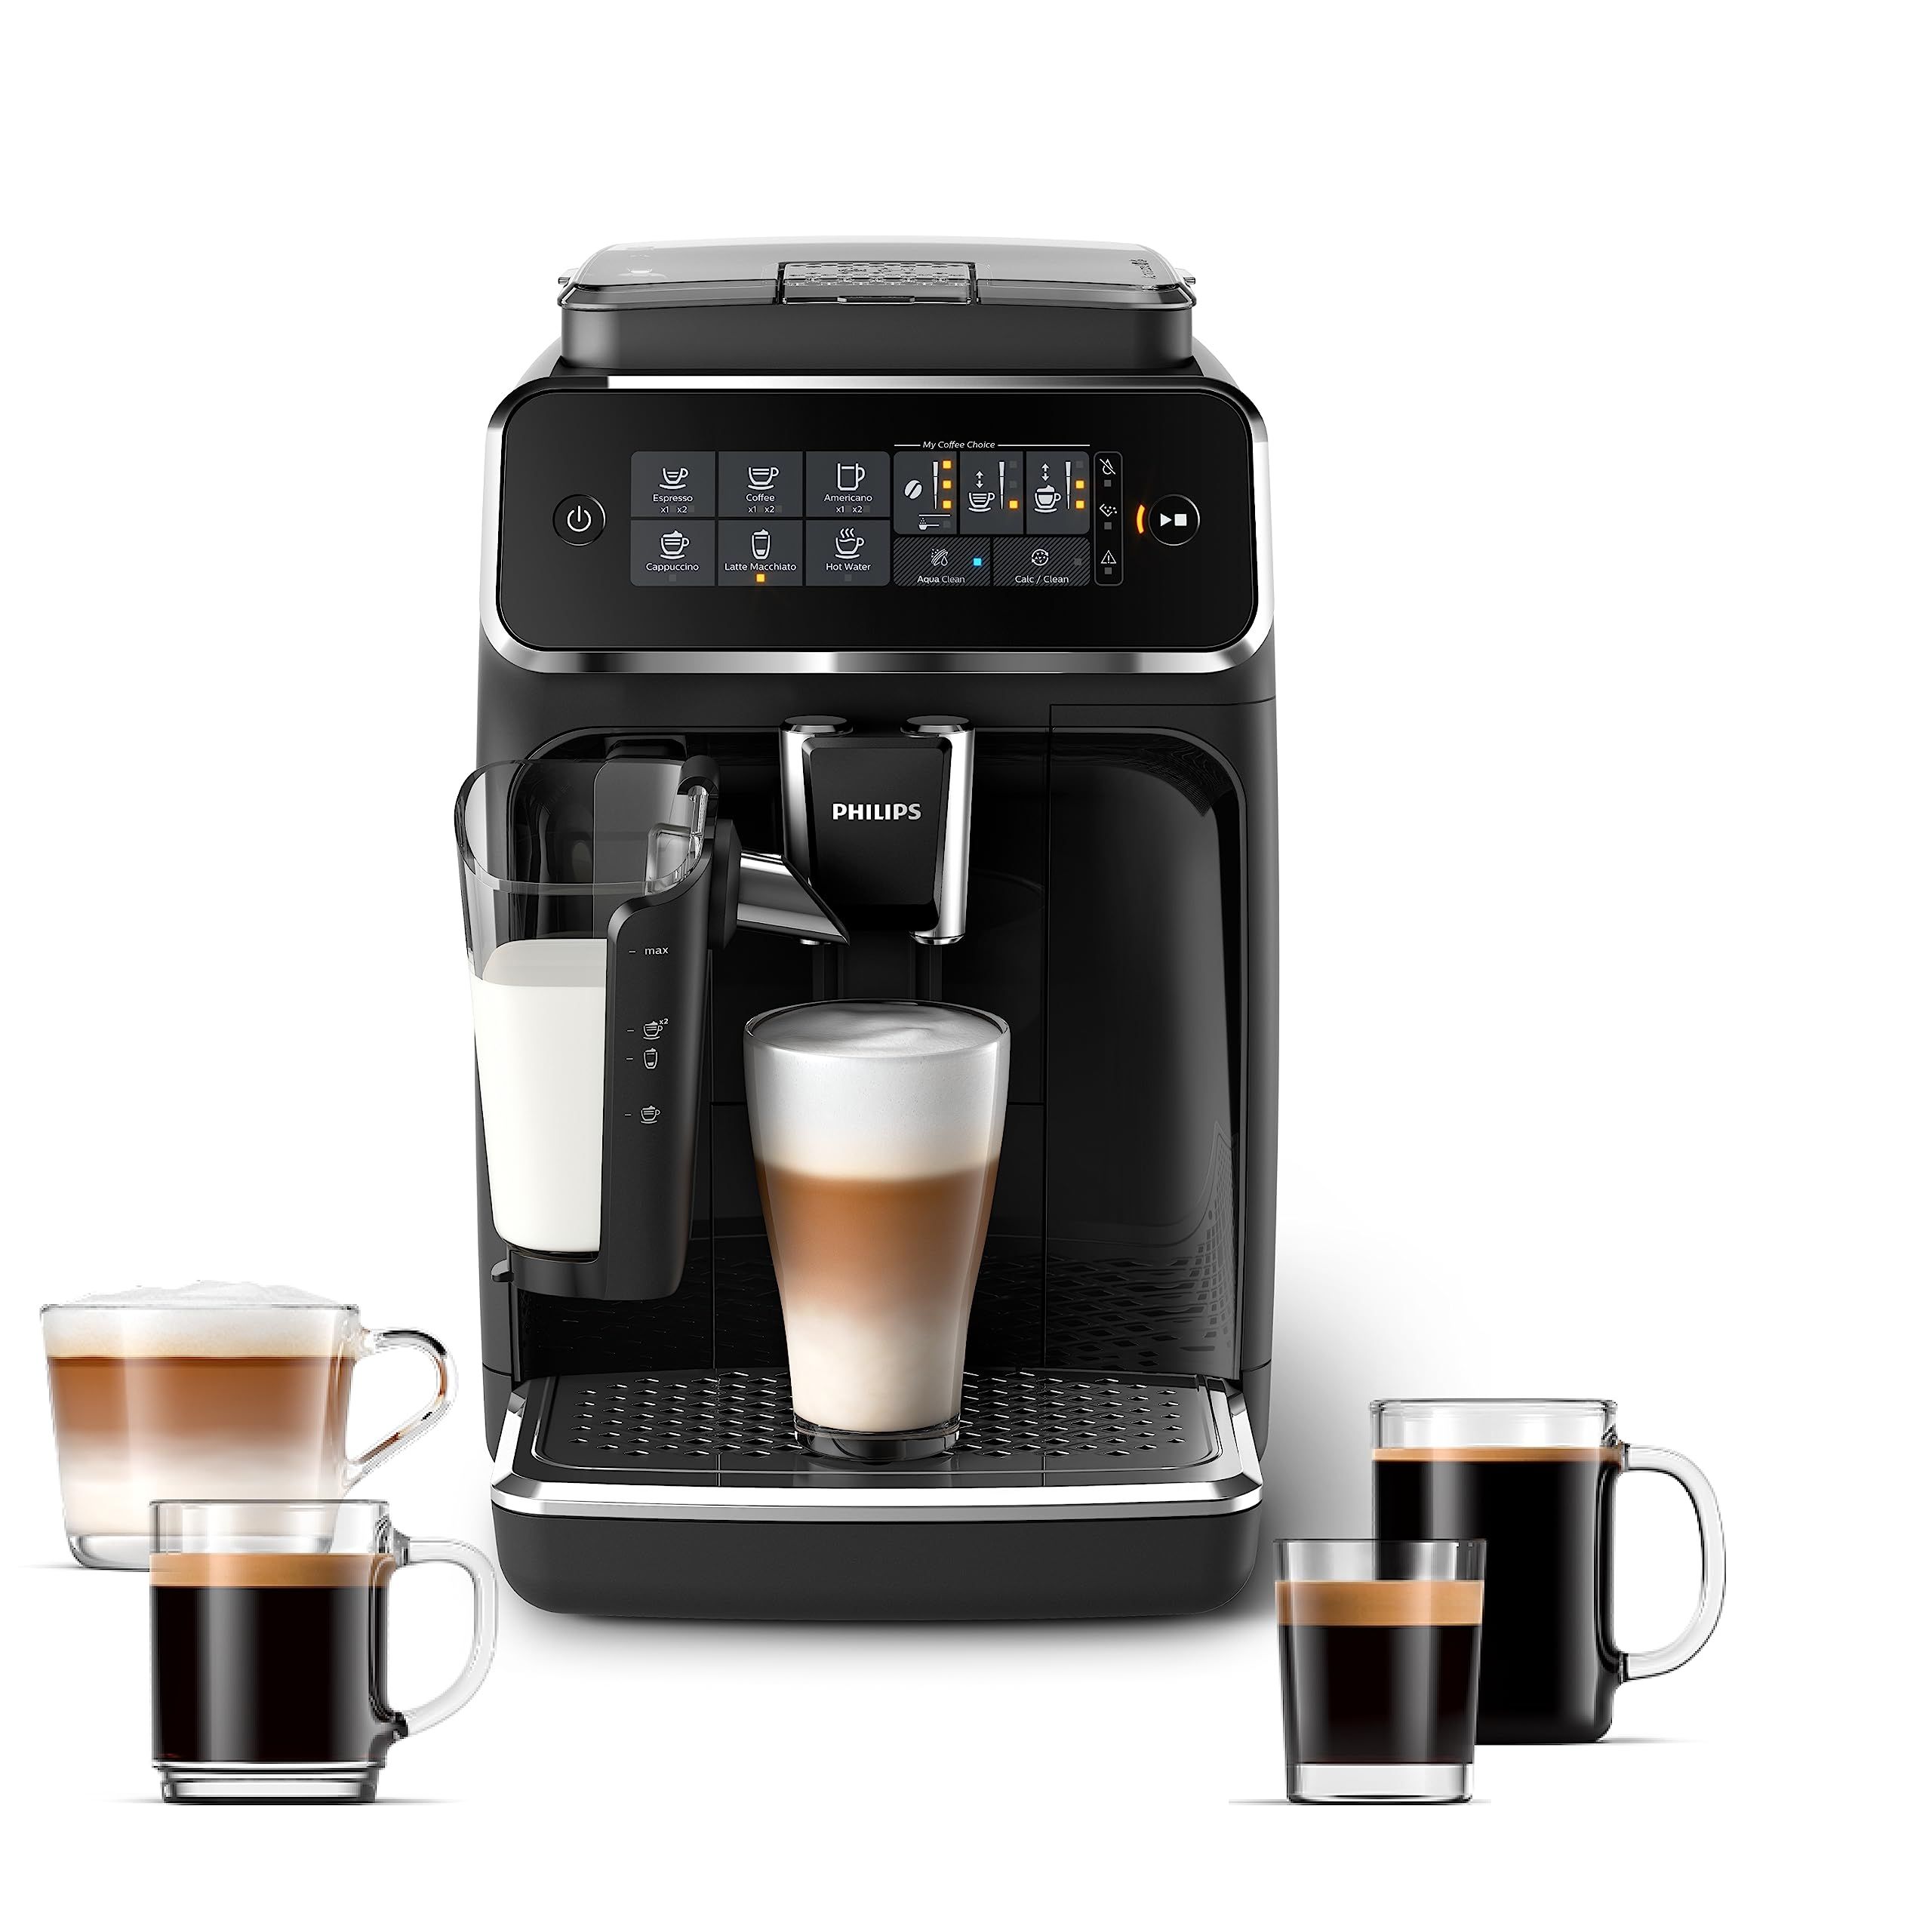 PHILIPS 3200 Series Fully Automatic Espresso Machine - LatteGo Milk Frother, 5 Coffee Varieties, ... | Amazon (US)